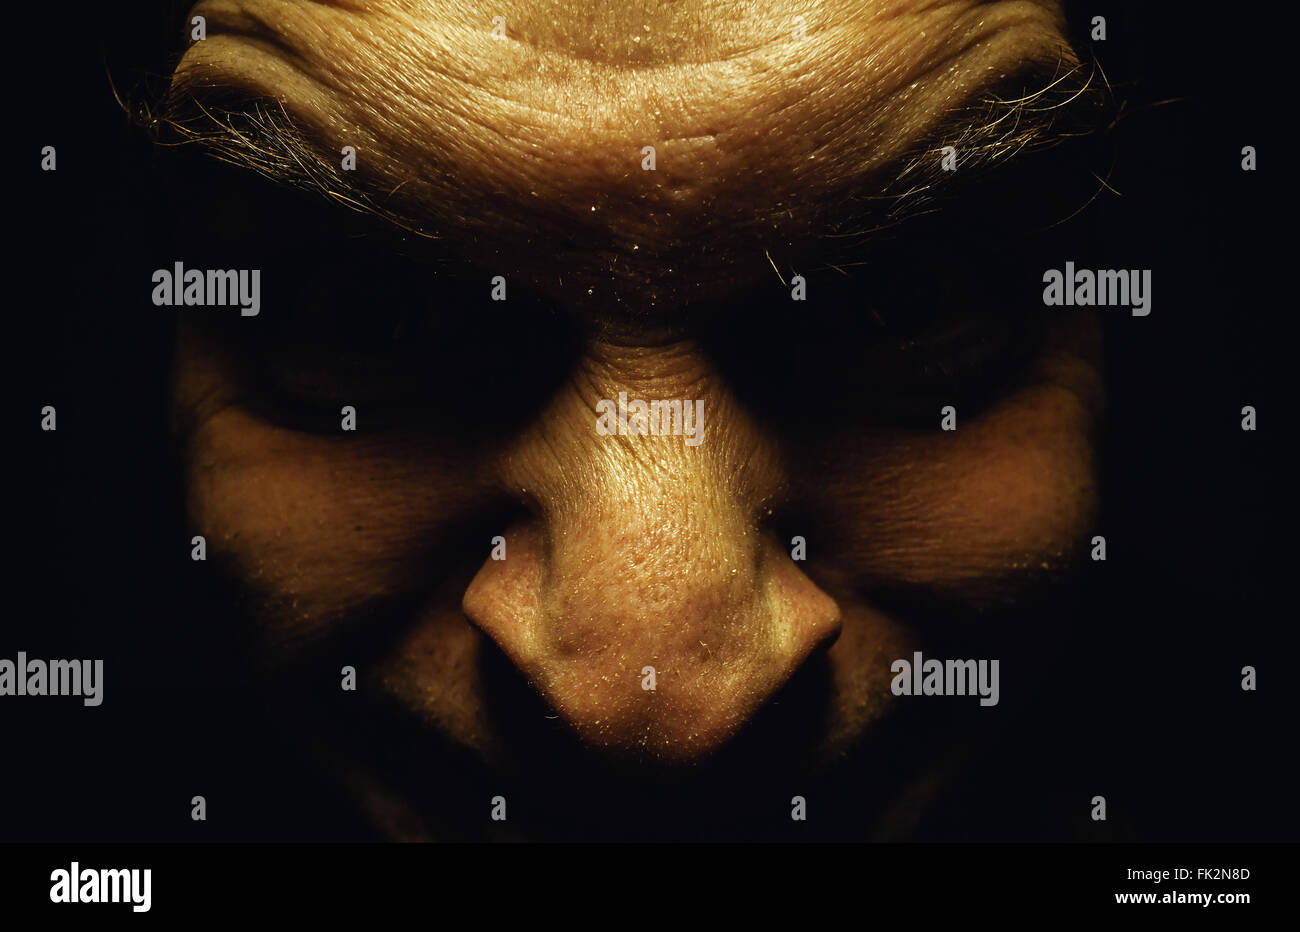 Facial expression of an ugly male face, details of eyes in dark and wrinkled skin. Stock Photo